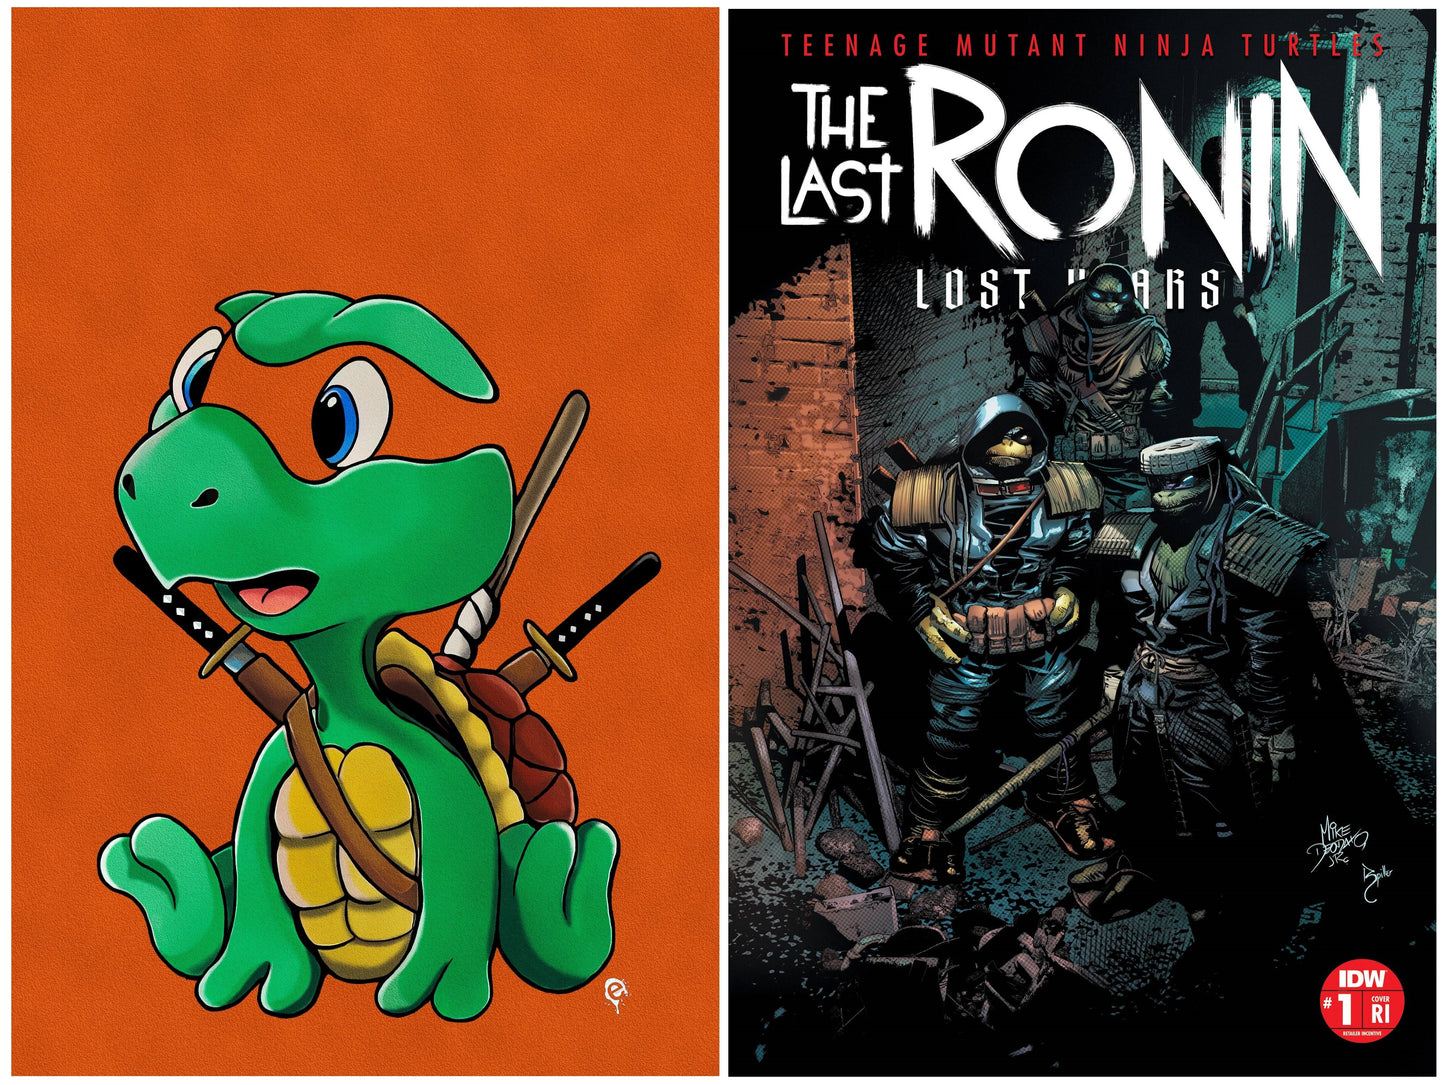 TMNT LAST RONIN LOST YEARS #1 ERIC HEARD NEGATIVE BABY VIRGIN VARIANT LIMITED TO 777 COPIES WITH NUMBERED COA + 1:25 VARIANT